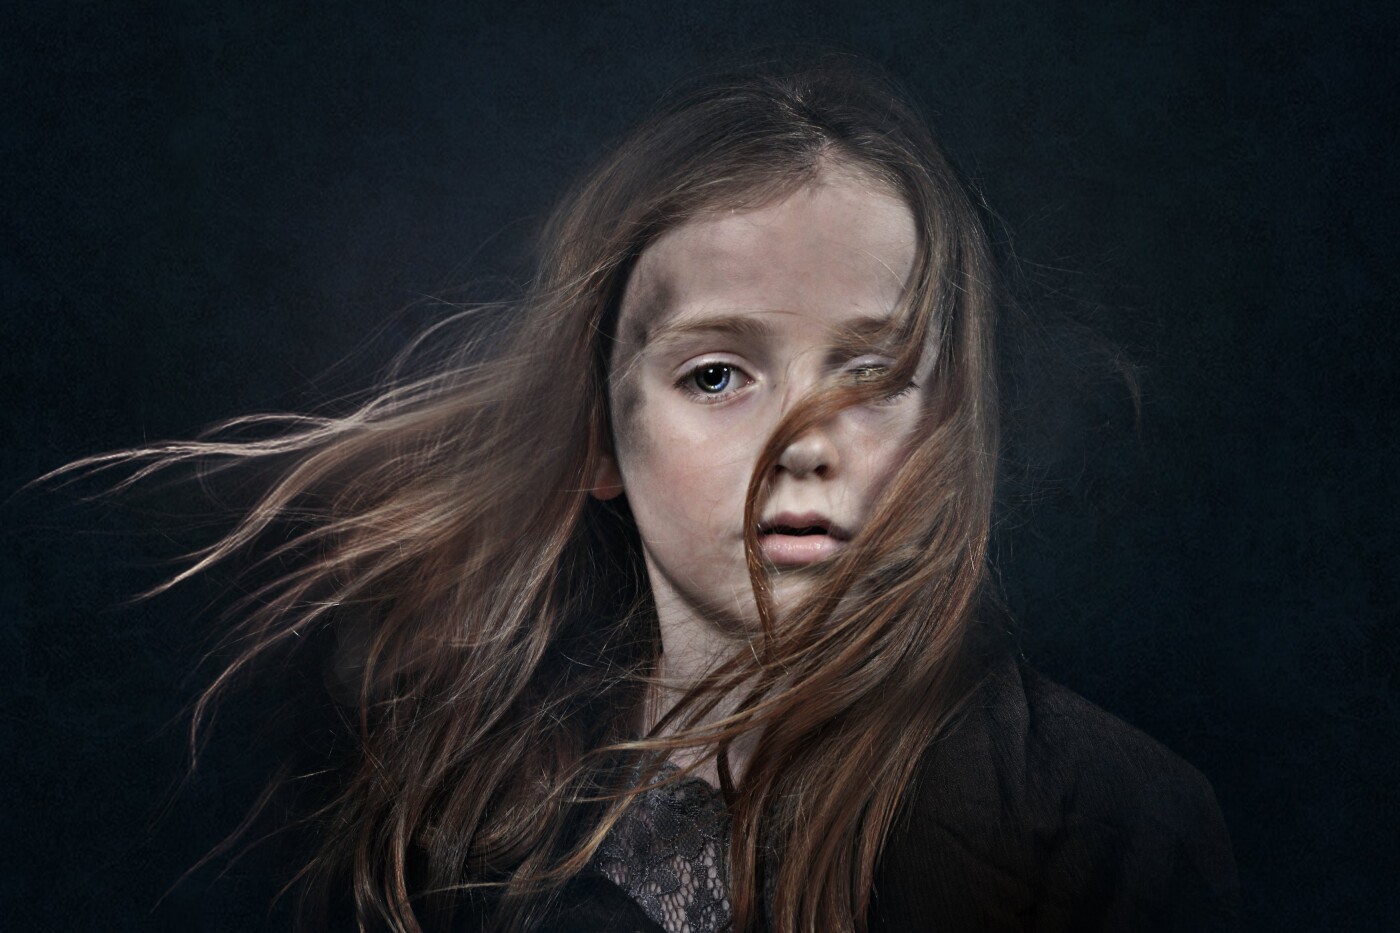 Young Cosette  inspire by Les Miserables. Model Jessica Emily Venn has heart in the character from this famous musical, photographing the iconic image that carries the all too familiar tale of hope.